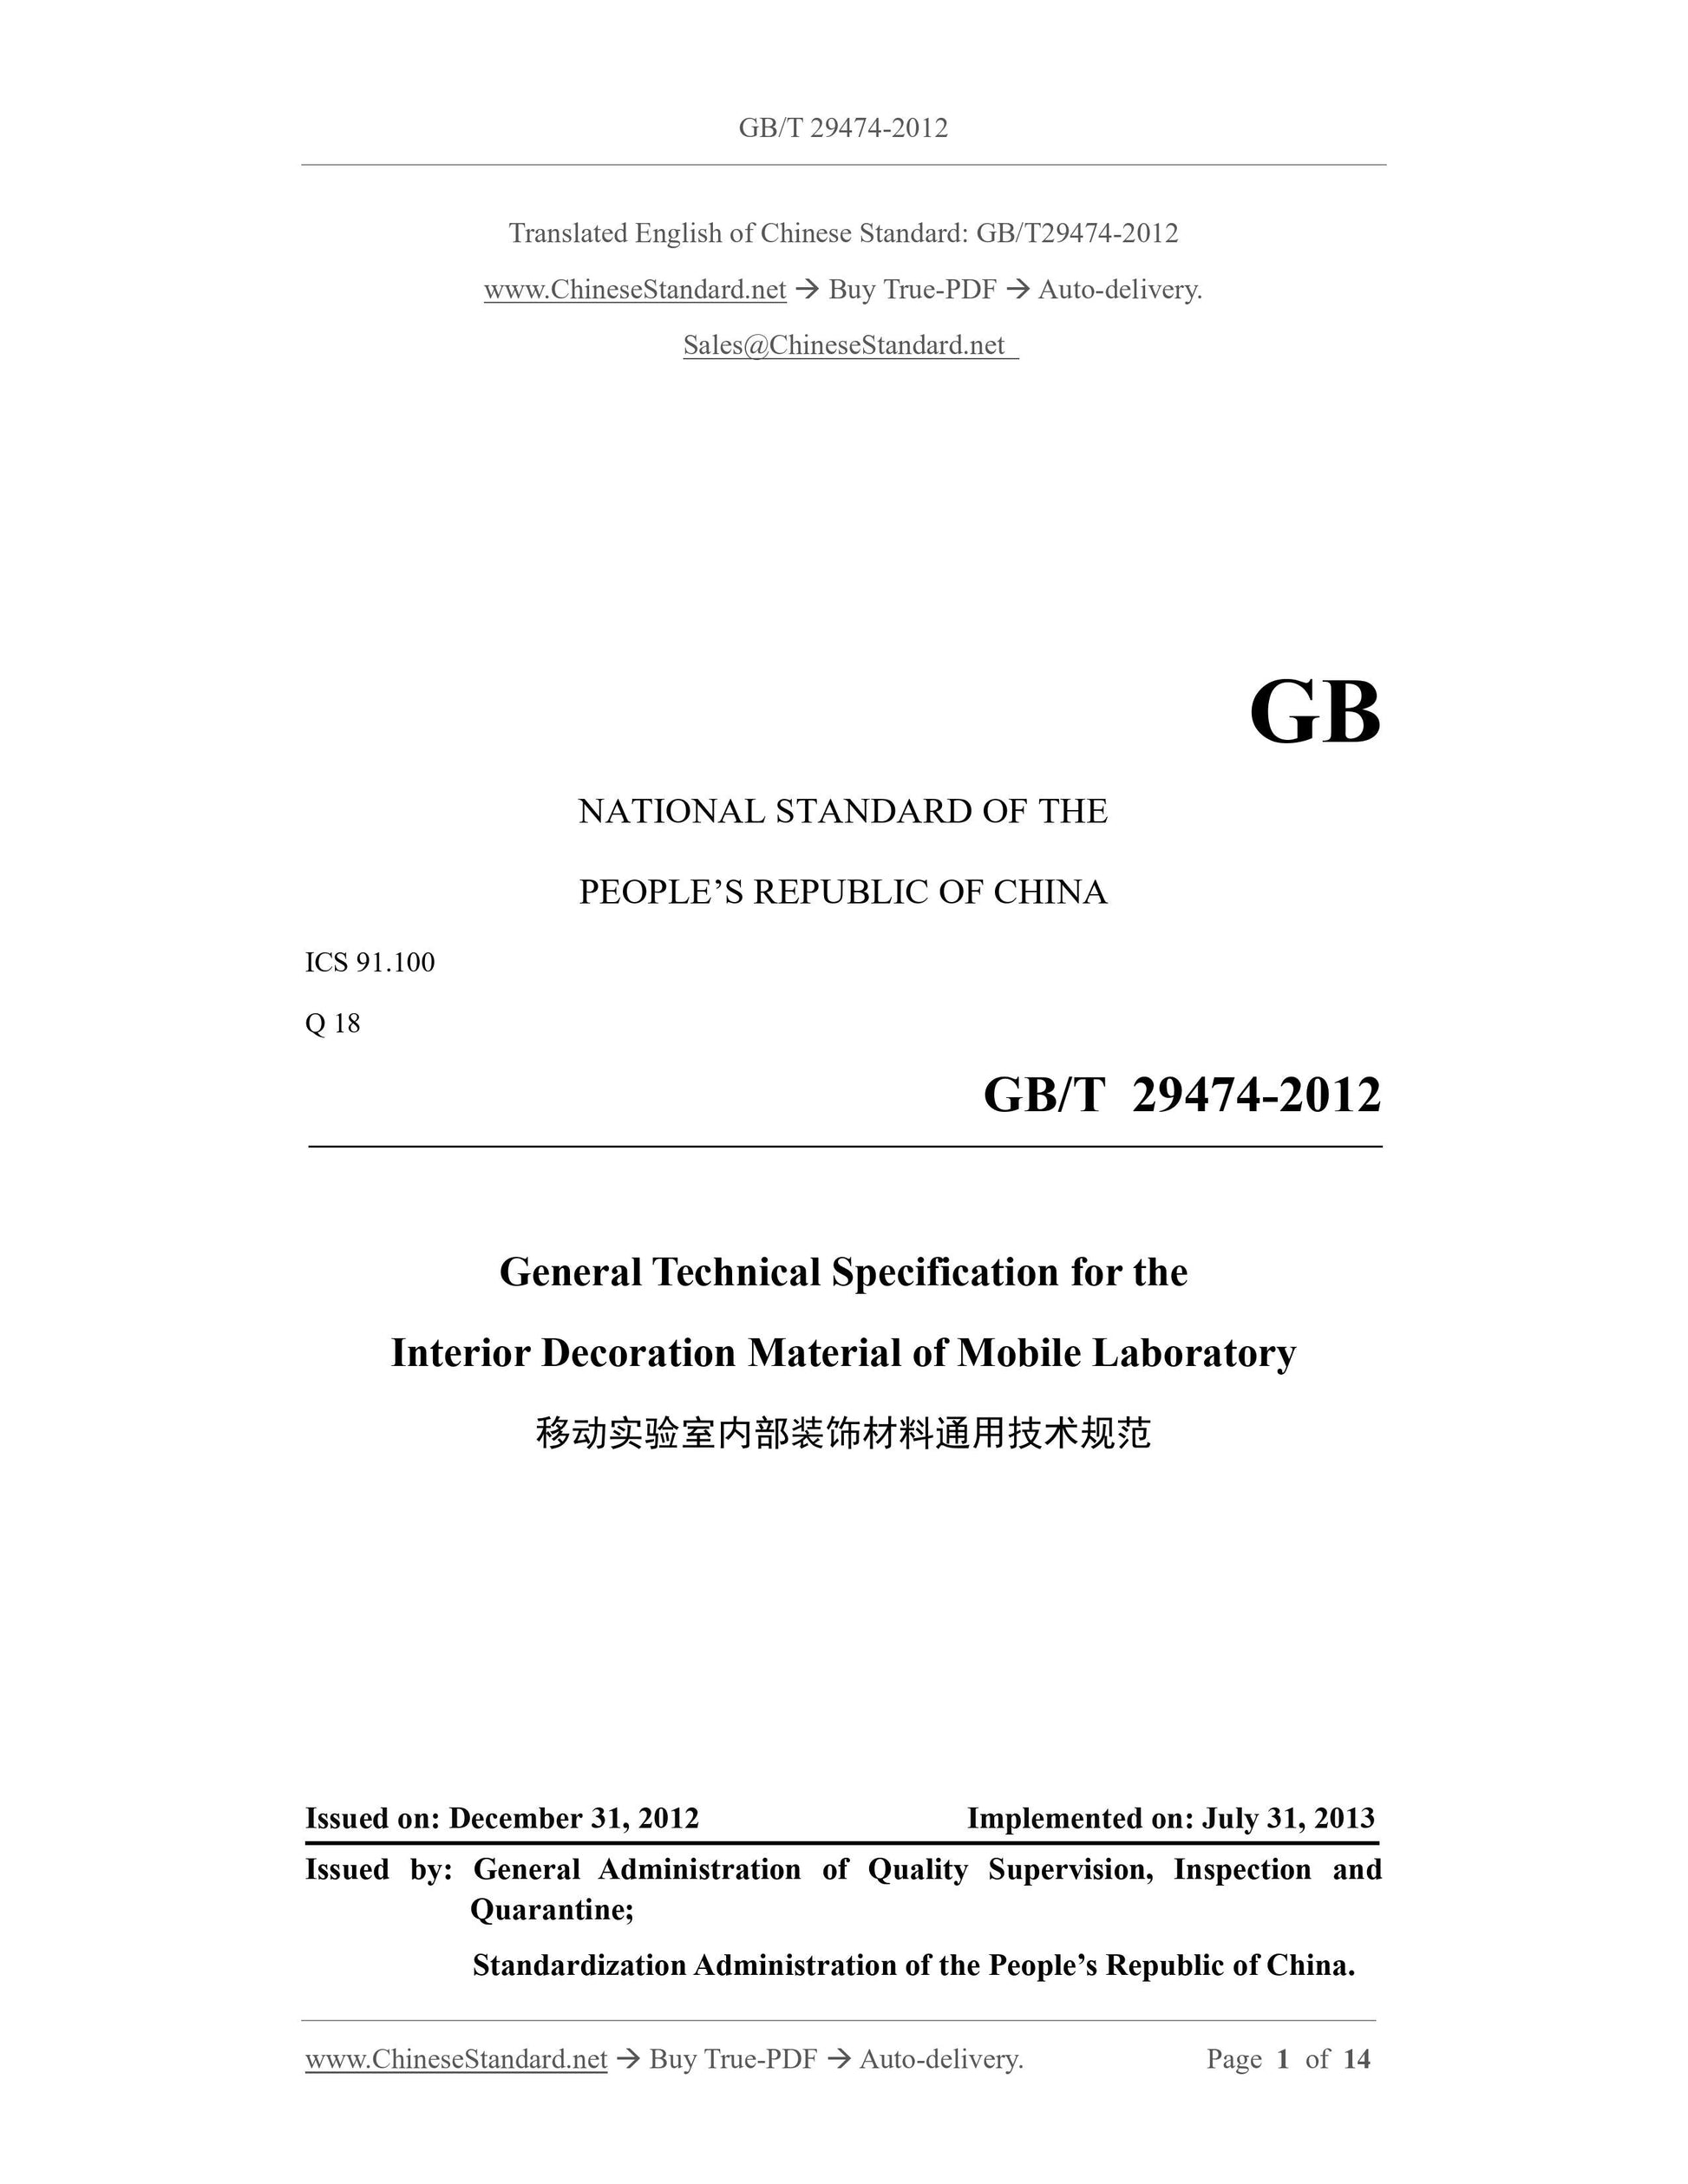 GB/T 29474-2012 Page 1